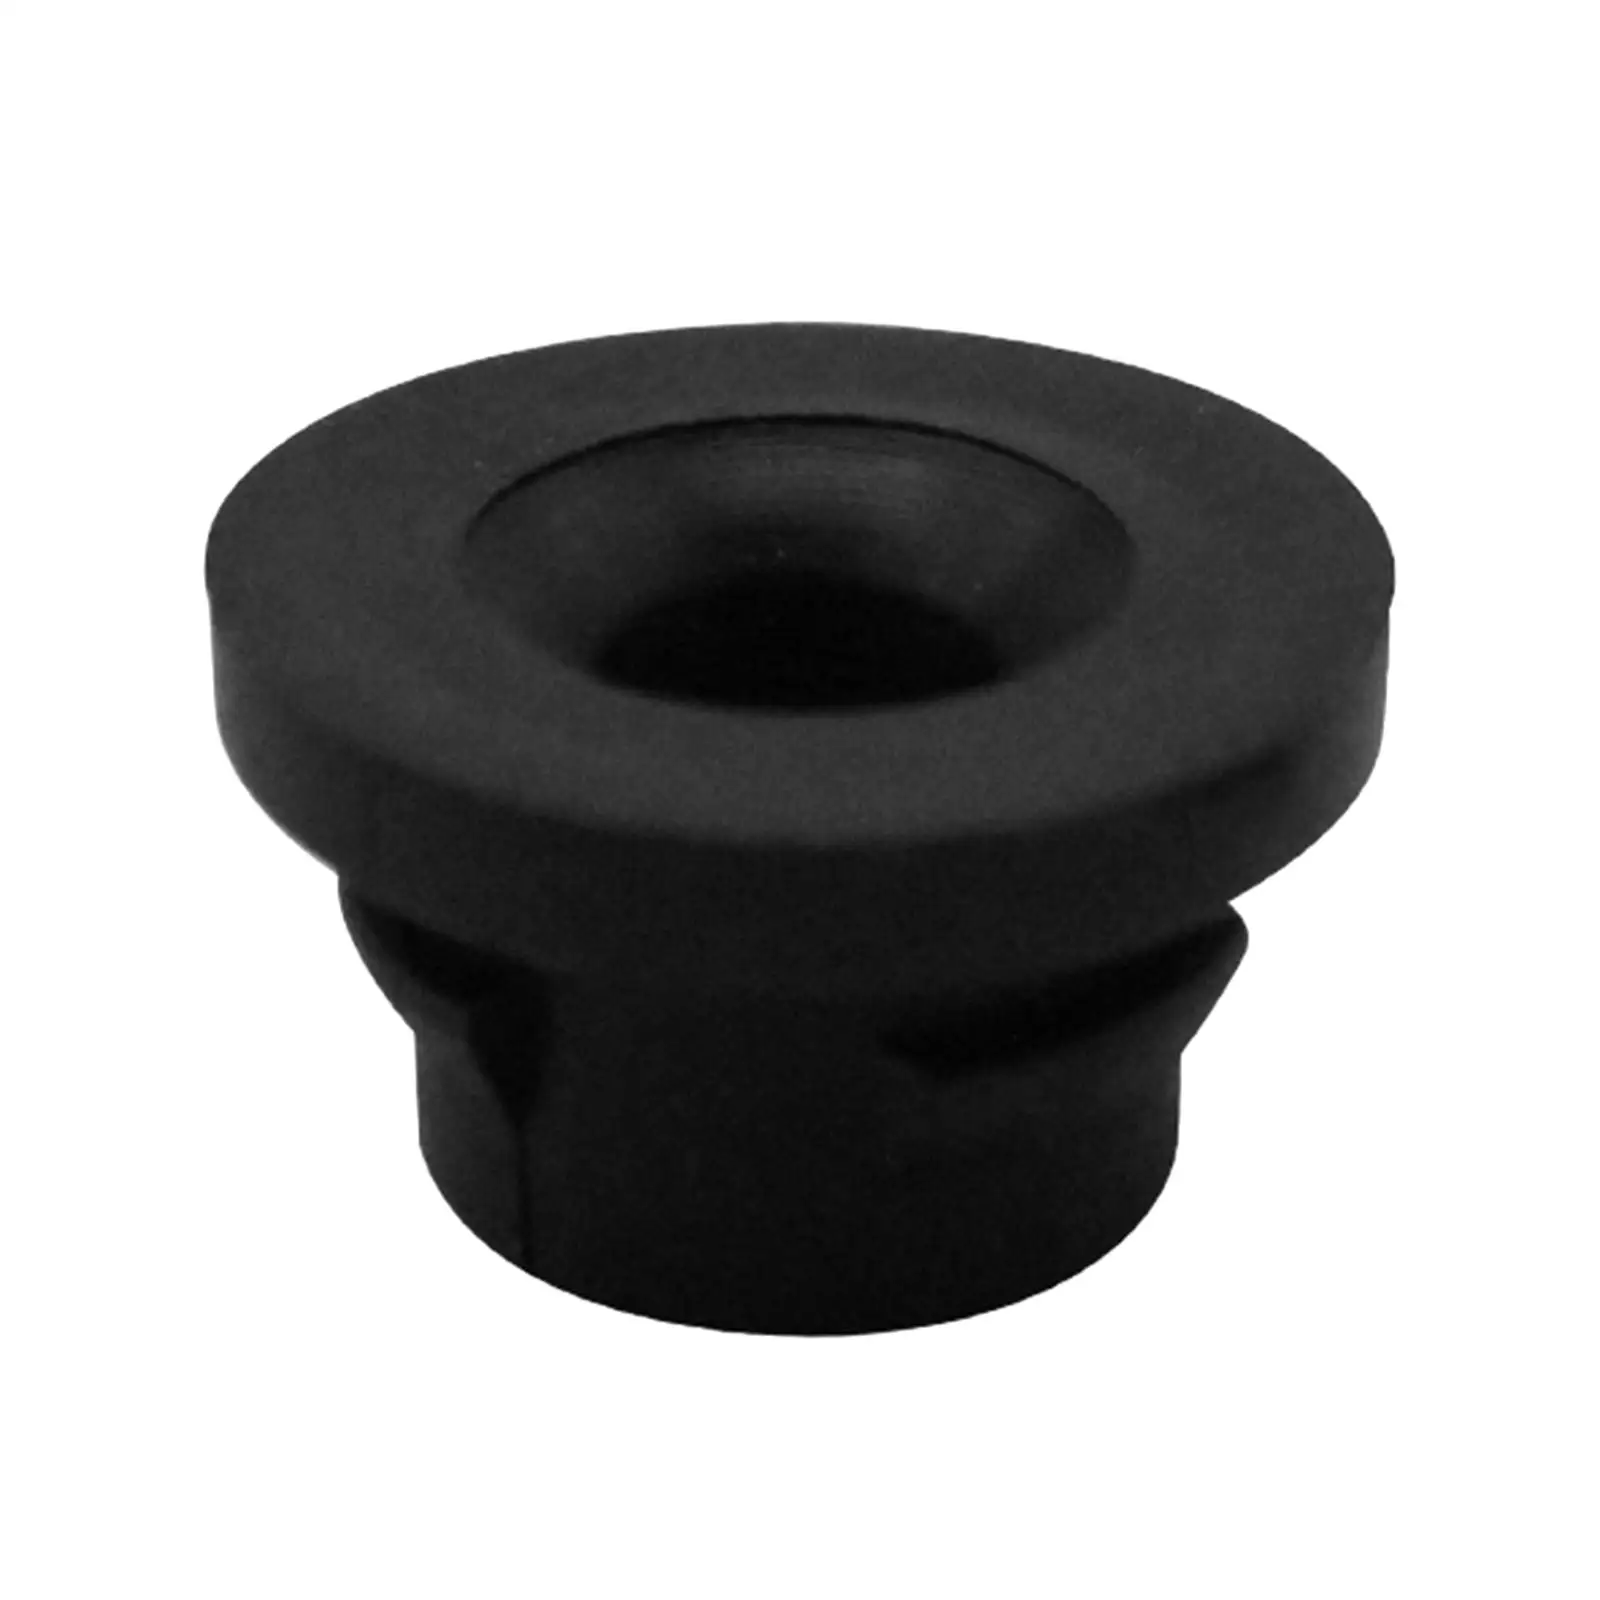 Car Air Filter Rubber Insert Fit for Citroen 1.6 Hdi Berlingo for